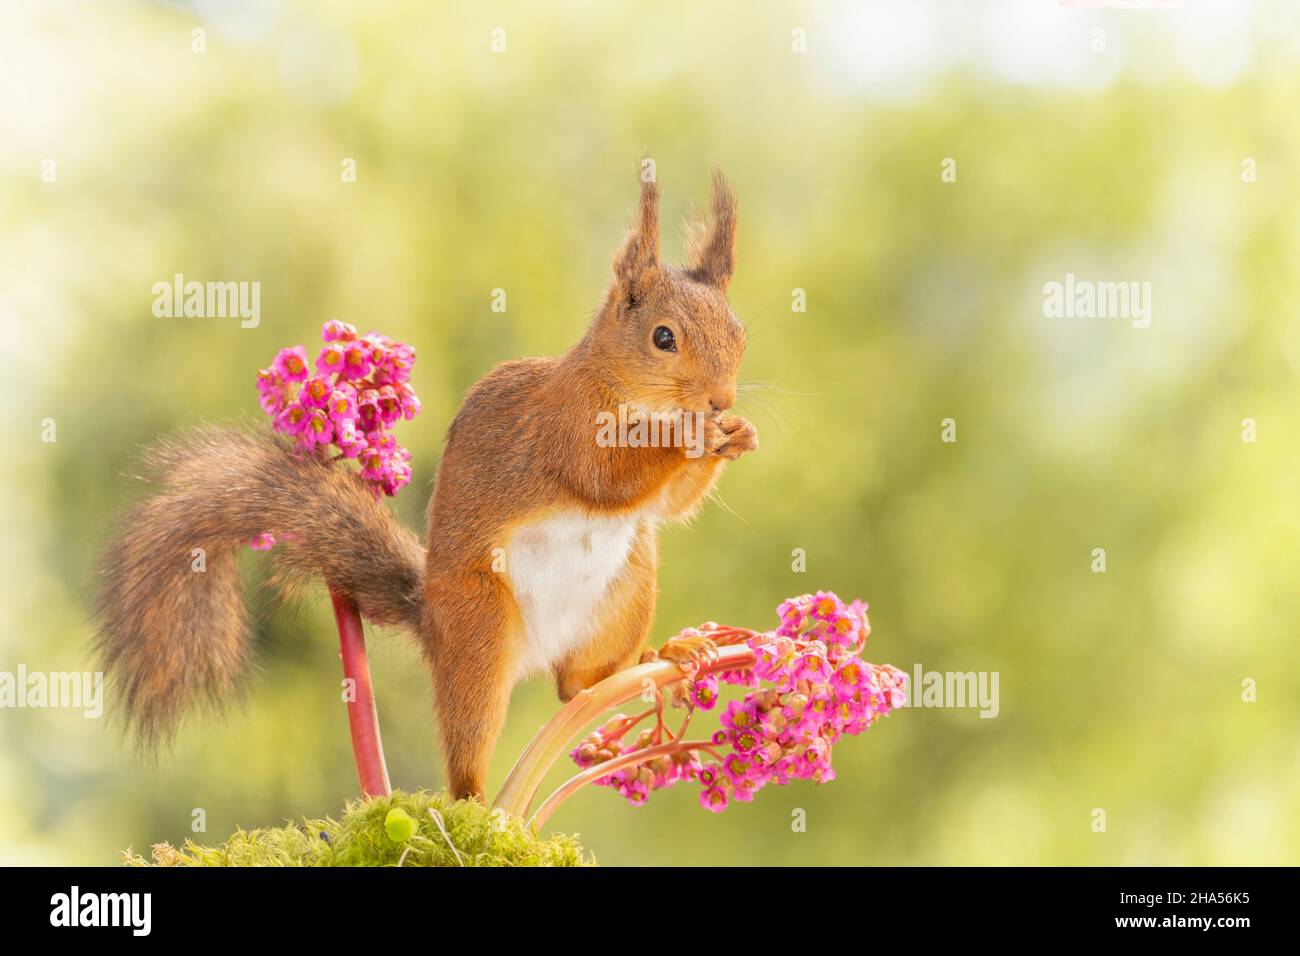 red squirrel is standing on bergenia flowers Stock Photo